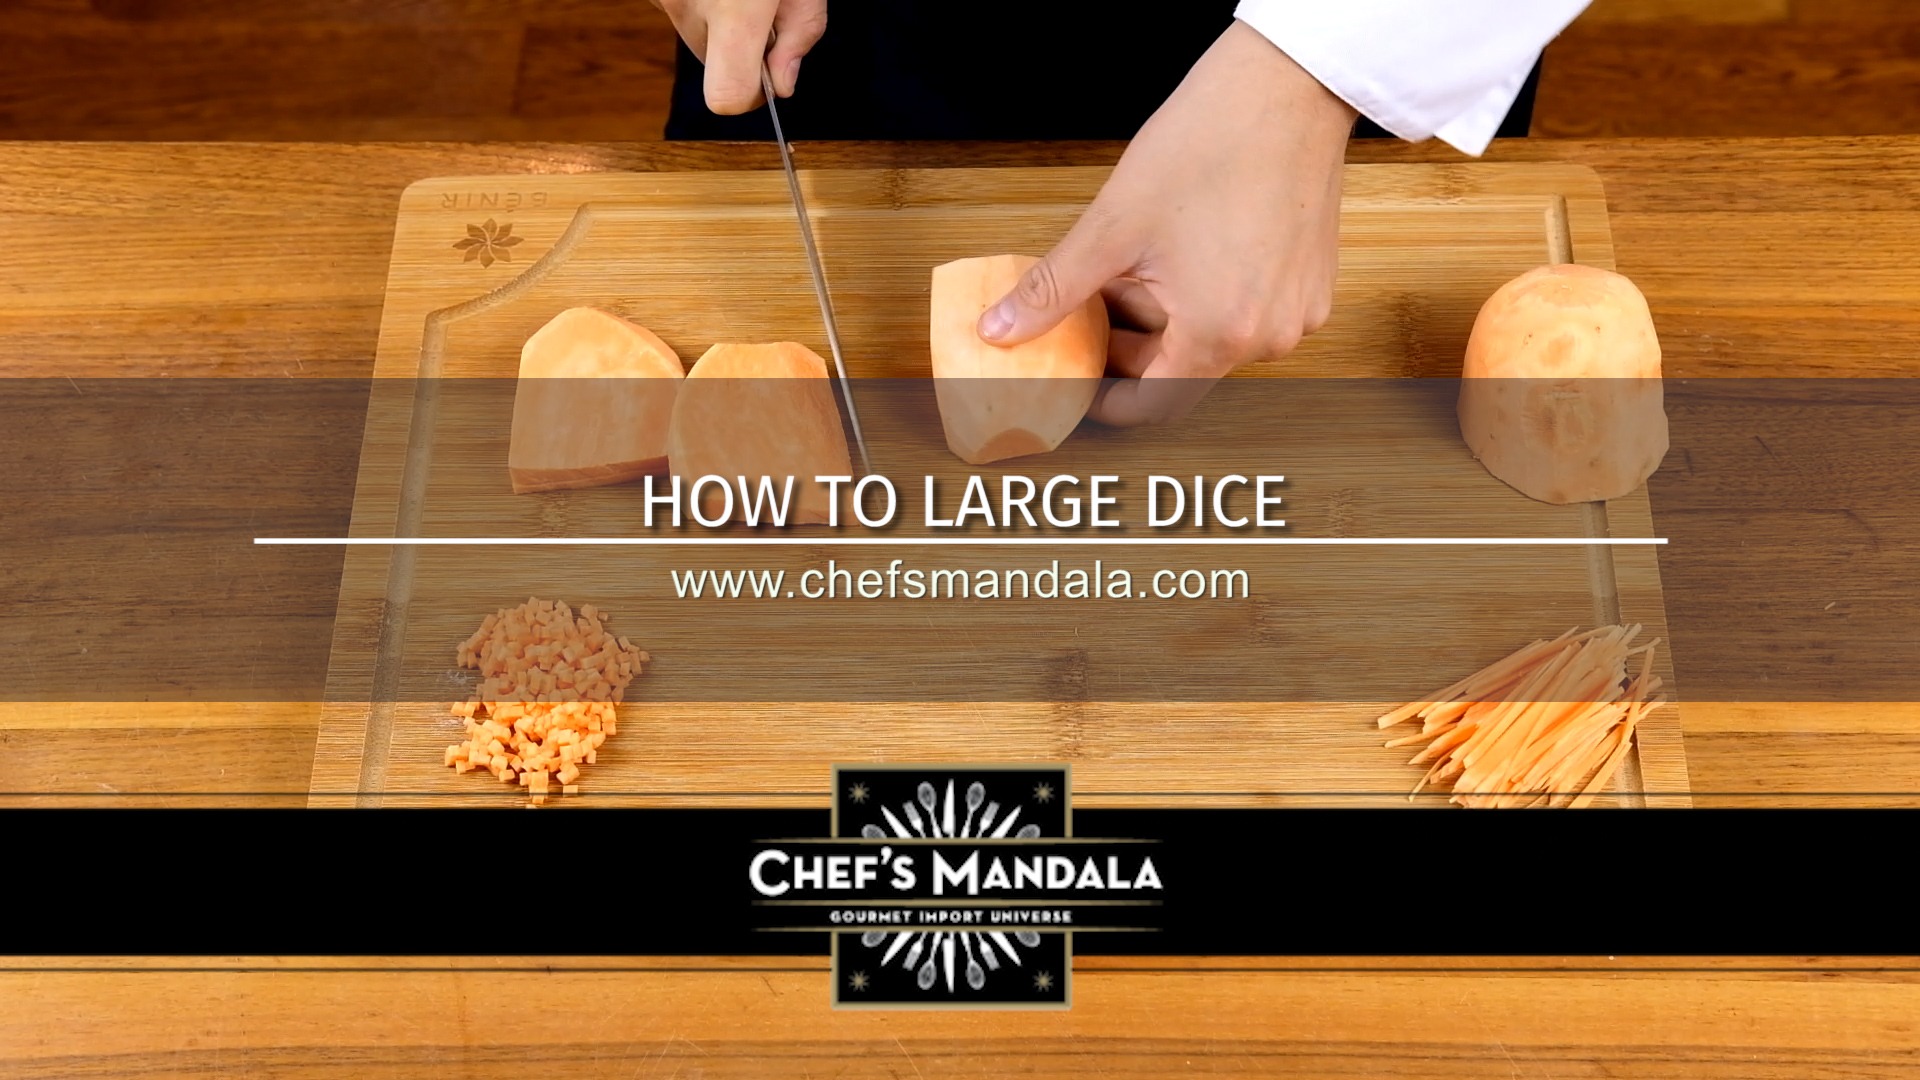 HOW TO LARGE DICE